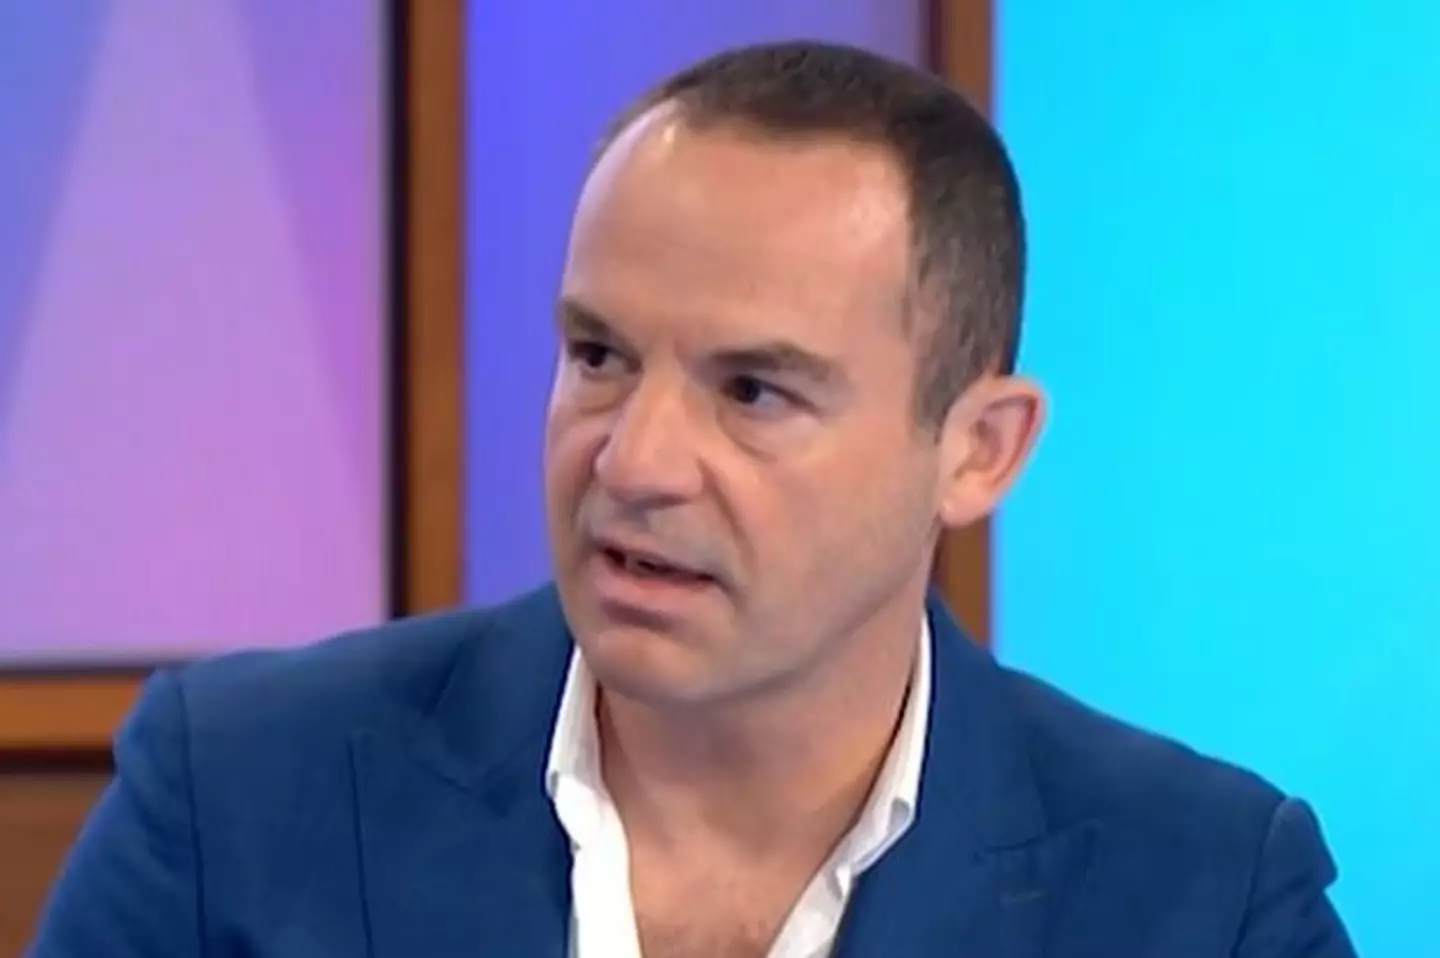 Martin Lewis revealed his findings about Zara's UK prices.